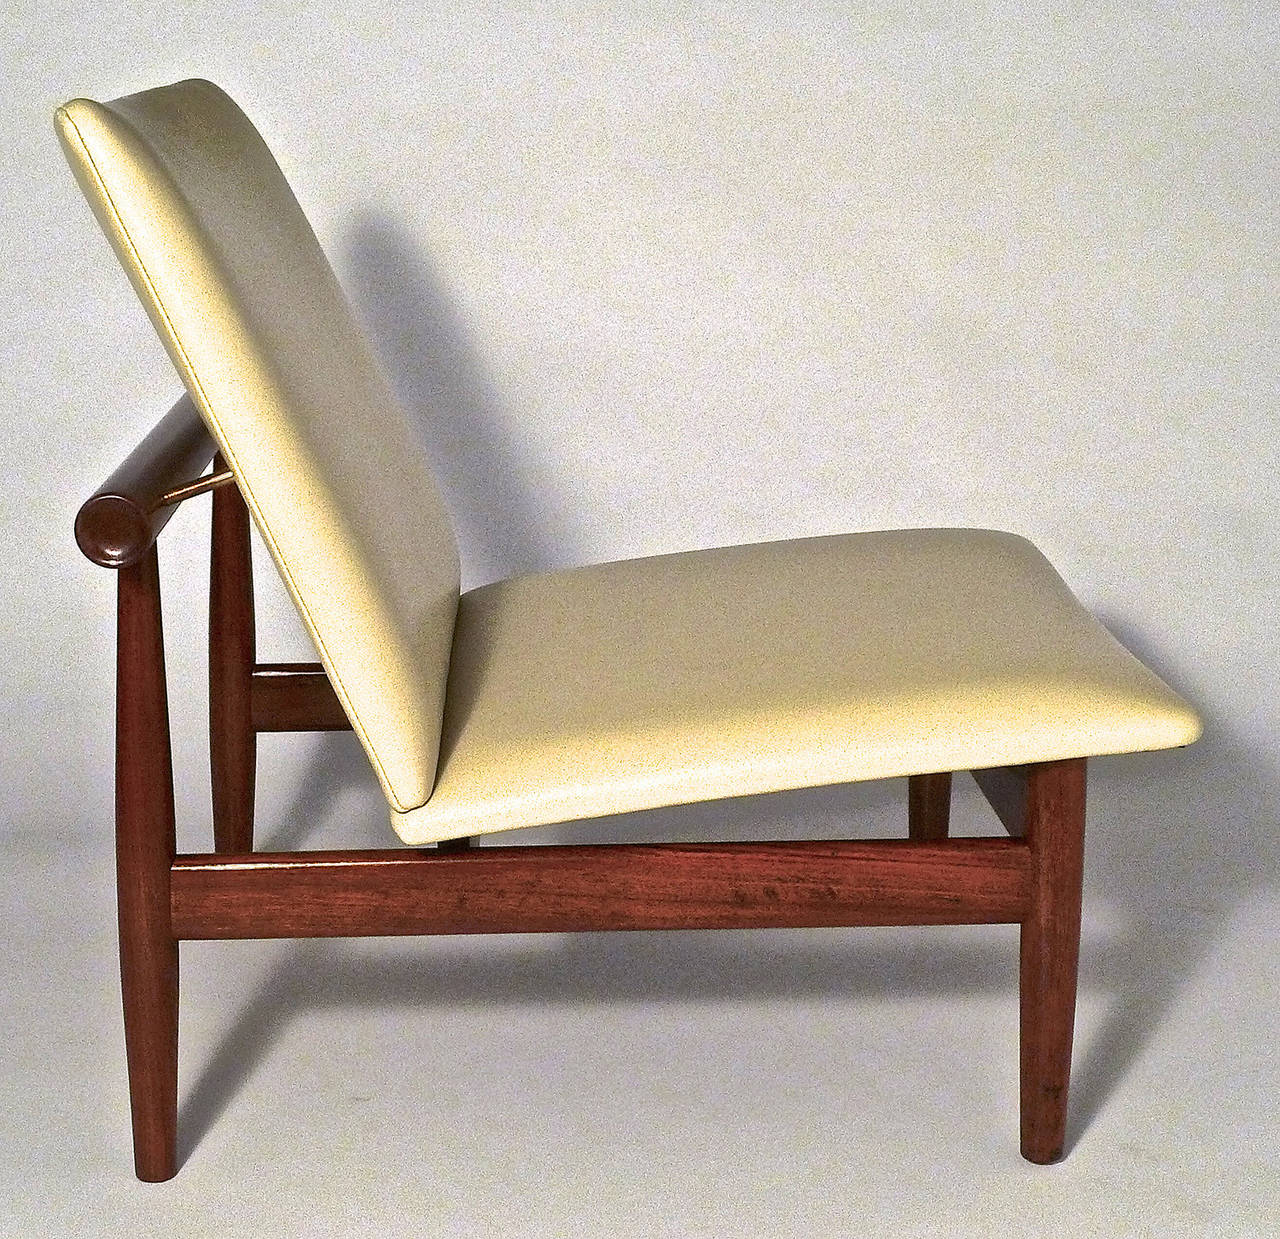 An exceptional pair of chairs by one of the great Danish furniture designers.  They have been reupholstered in leather.